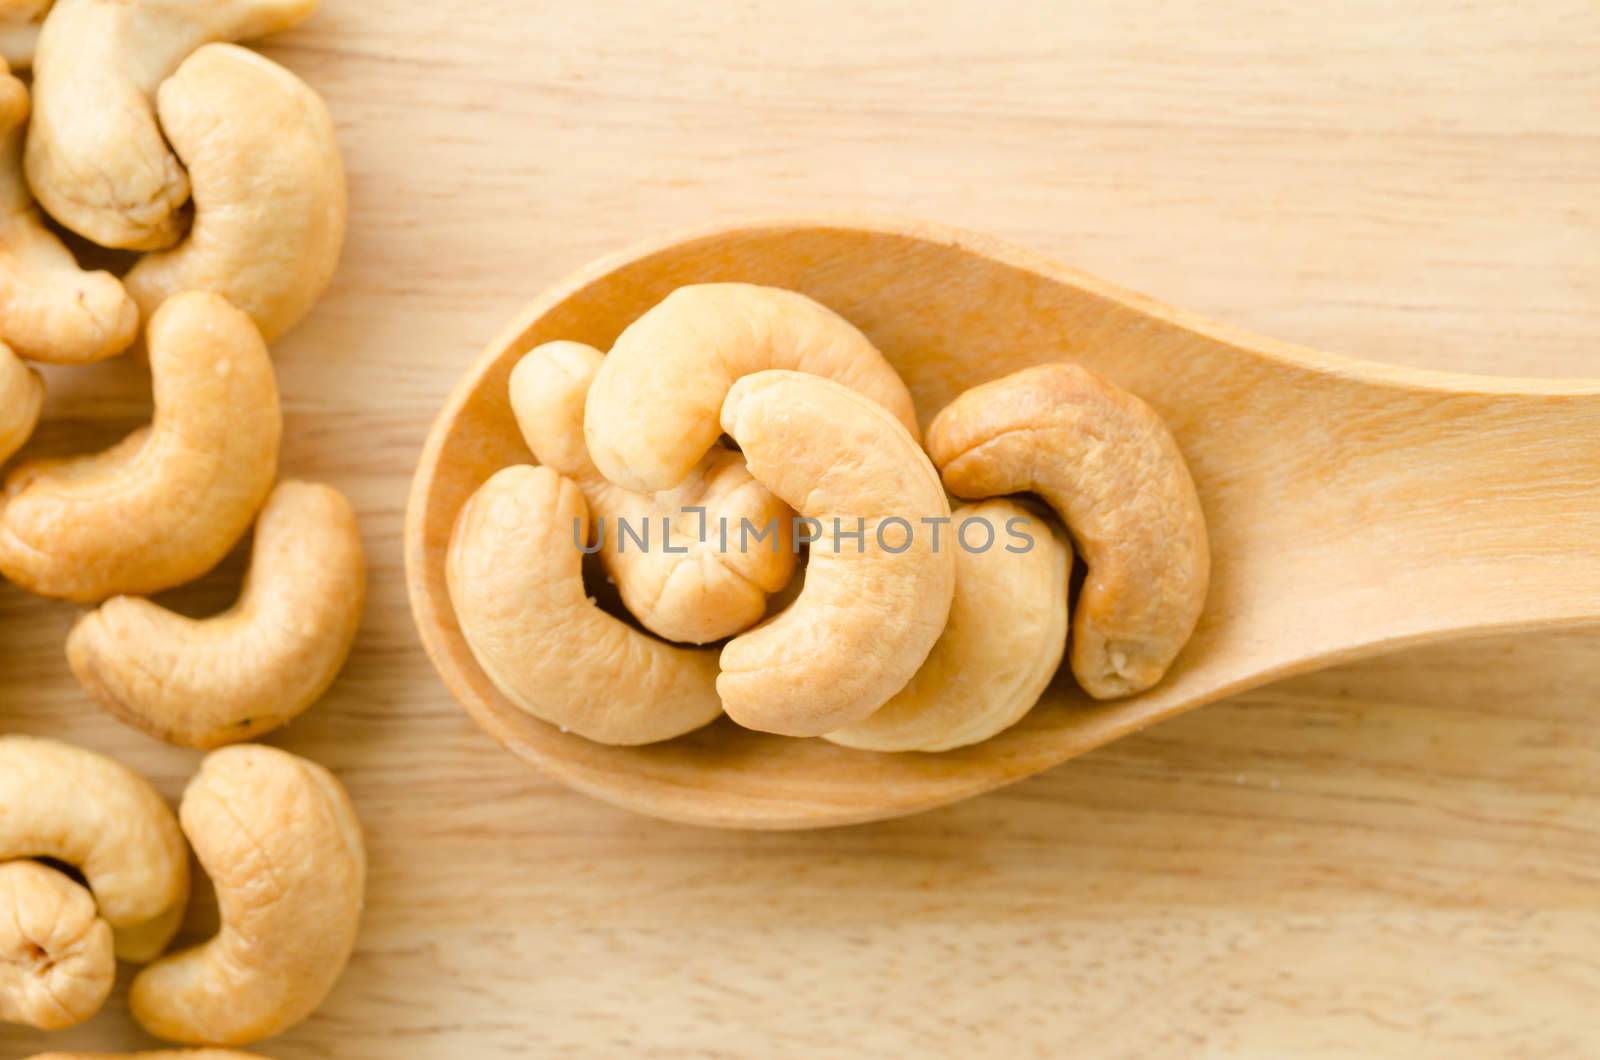 Roasted cashews on natural wooden background.